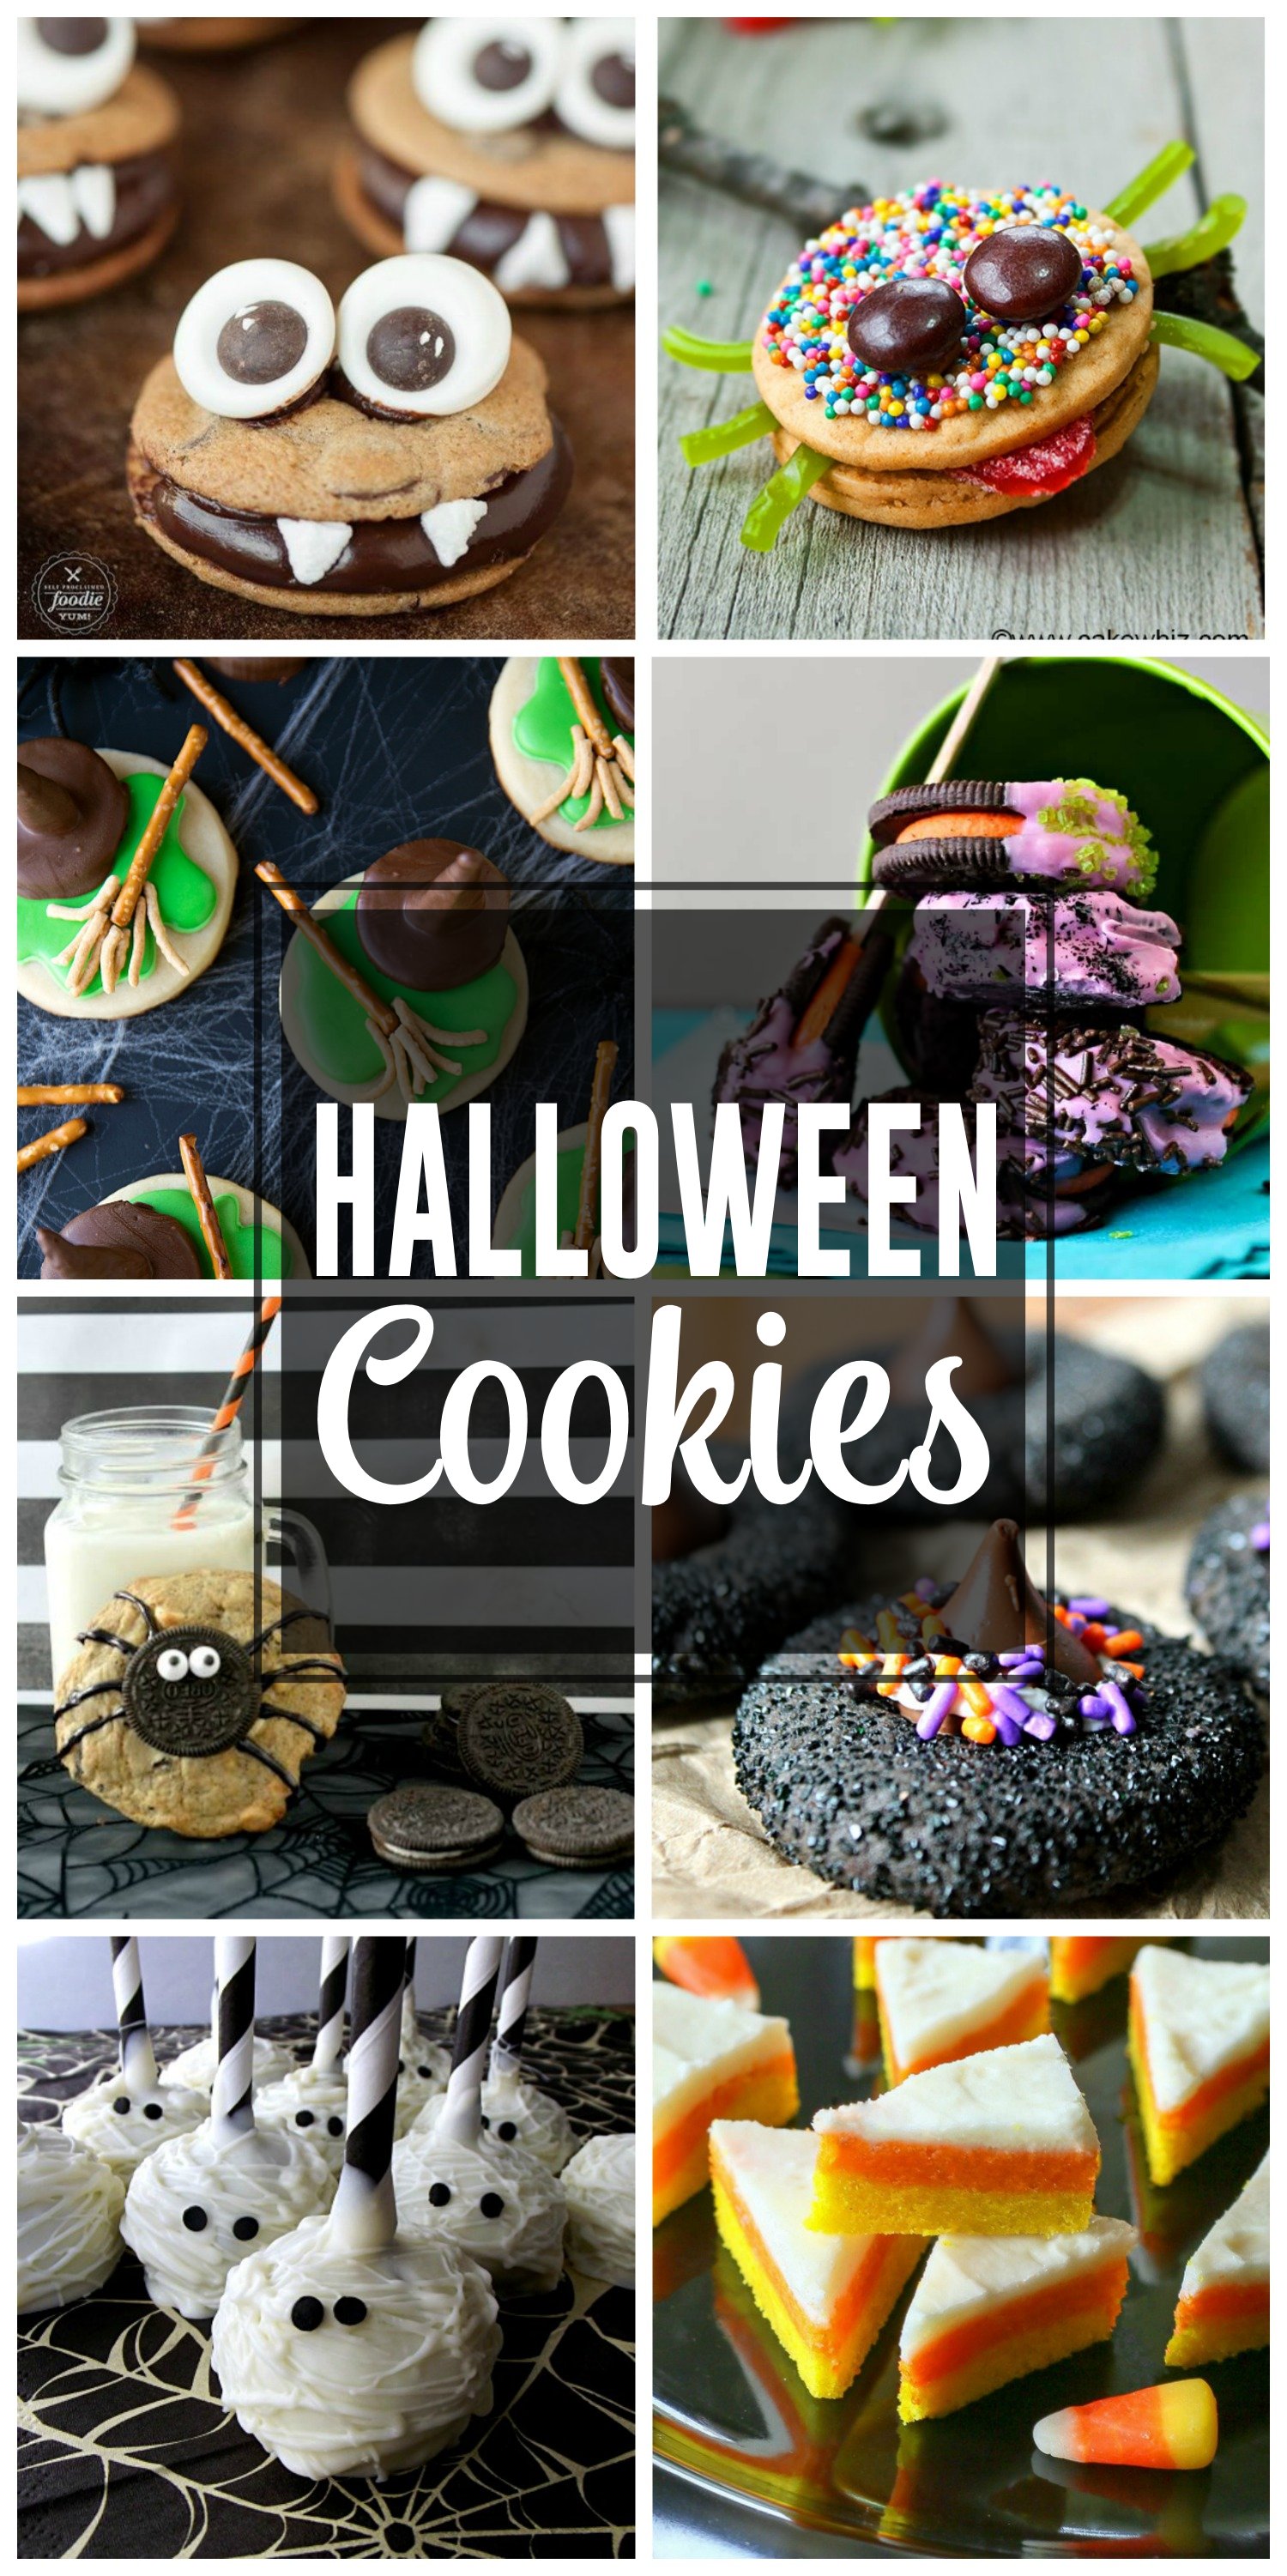 The BEST Halloween Cookies - 25 delicious and festive Halloween cookie recipes - lots of great ideas to get your culinary juices flowing. Bat cookies, Mummy Cookies, Witch Cookies